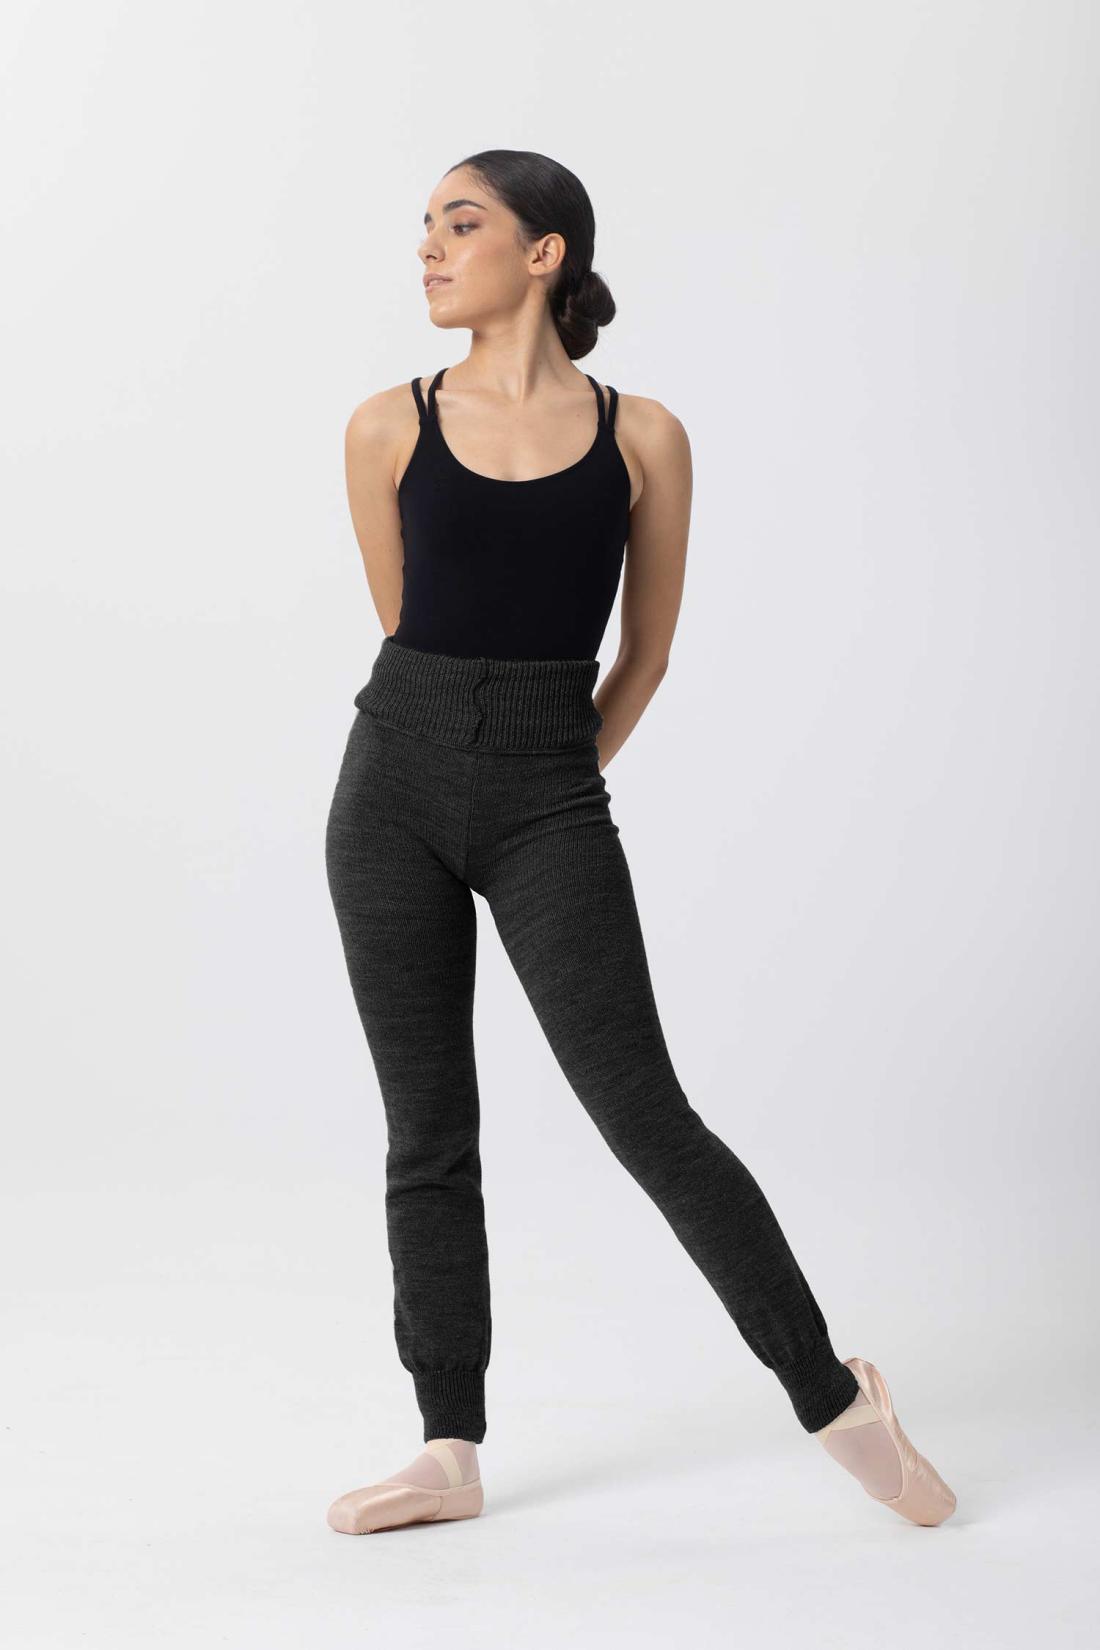 Warm up Intermezzo Knitted Pants with roll over waist band